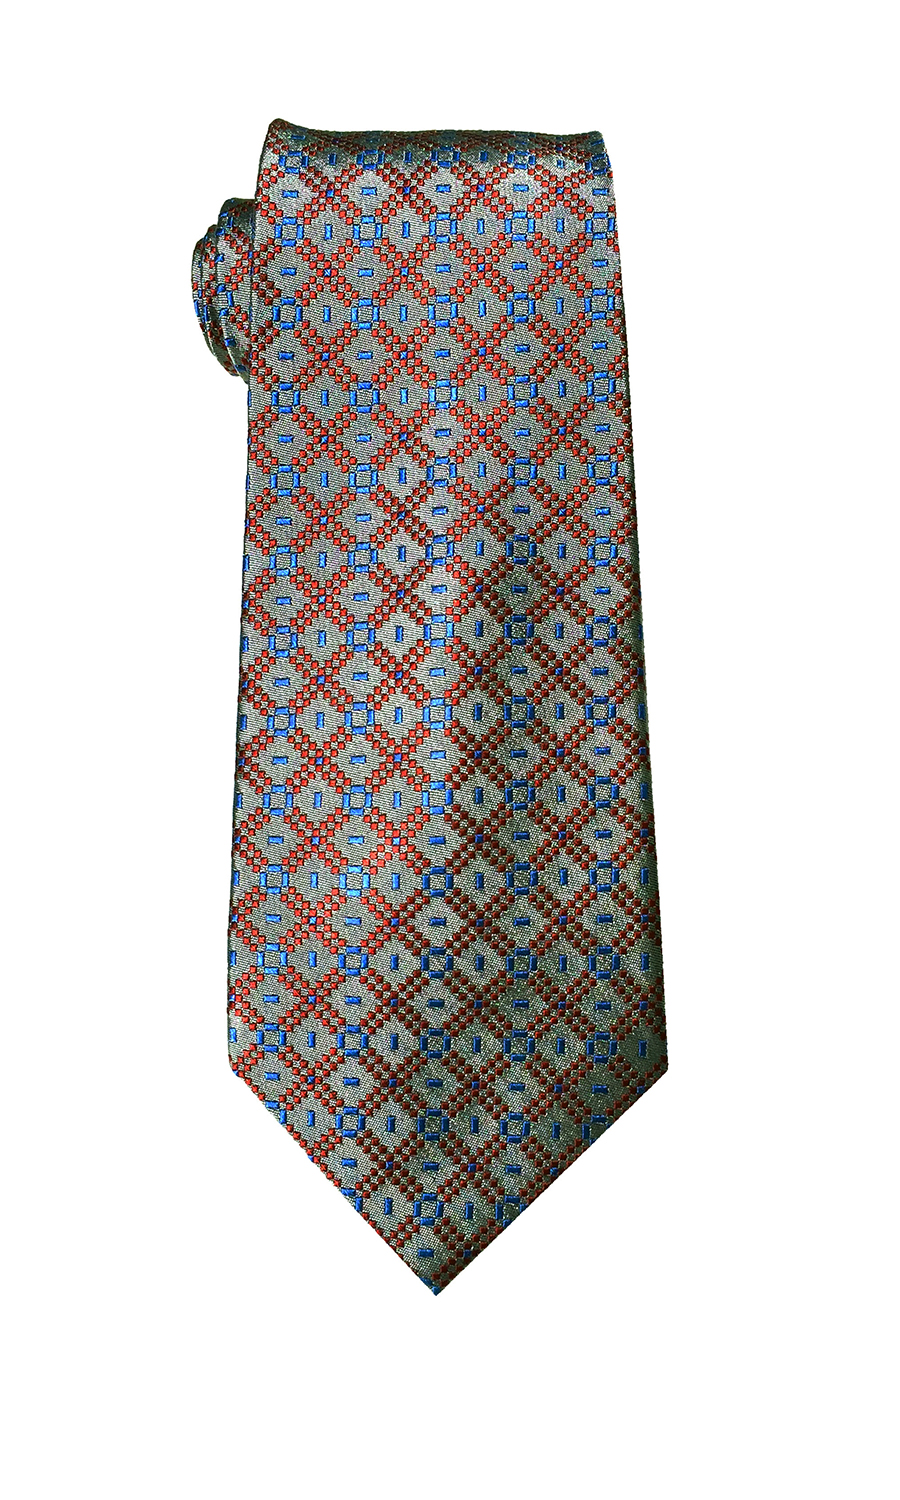 Delta Tango tie in light grey and red